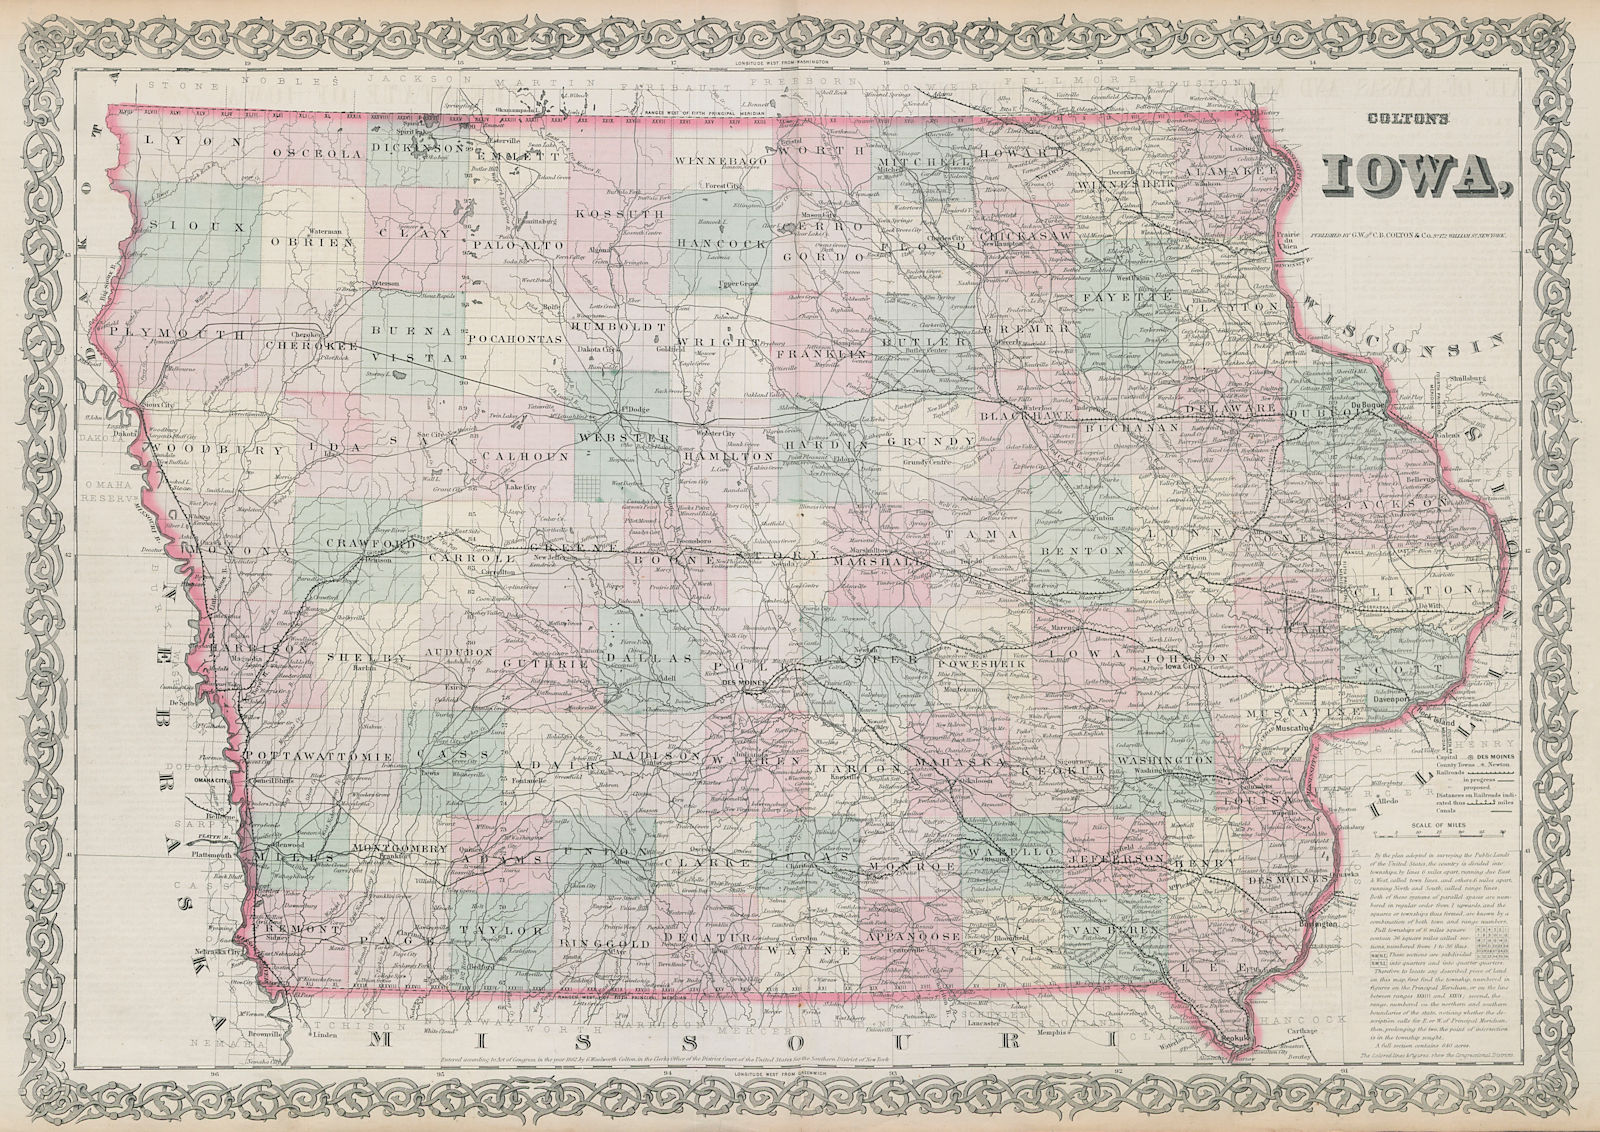 Associate Product Colton's Iowa. Decorative antique US state map 1869 old plan chart